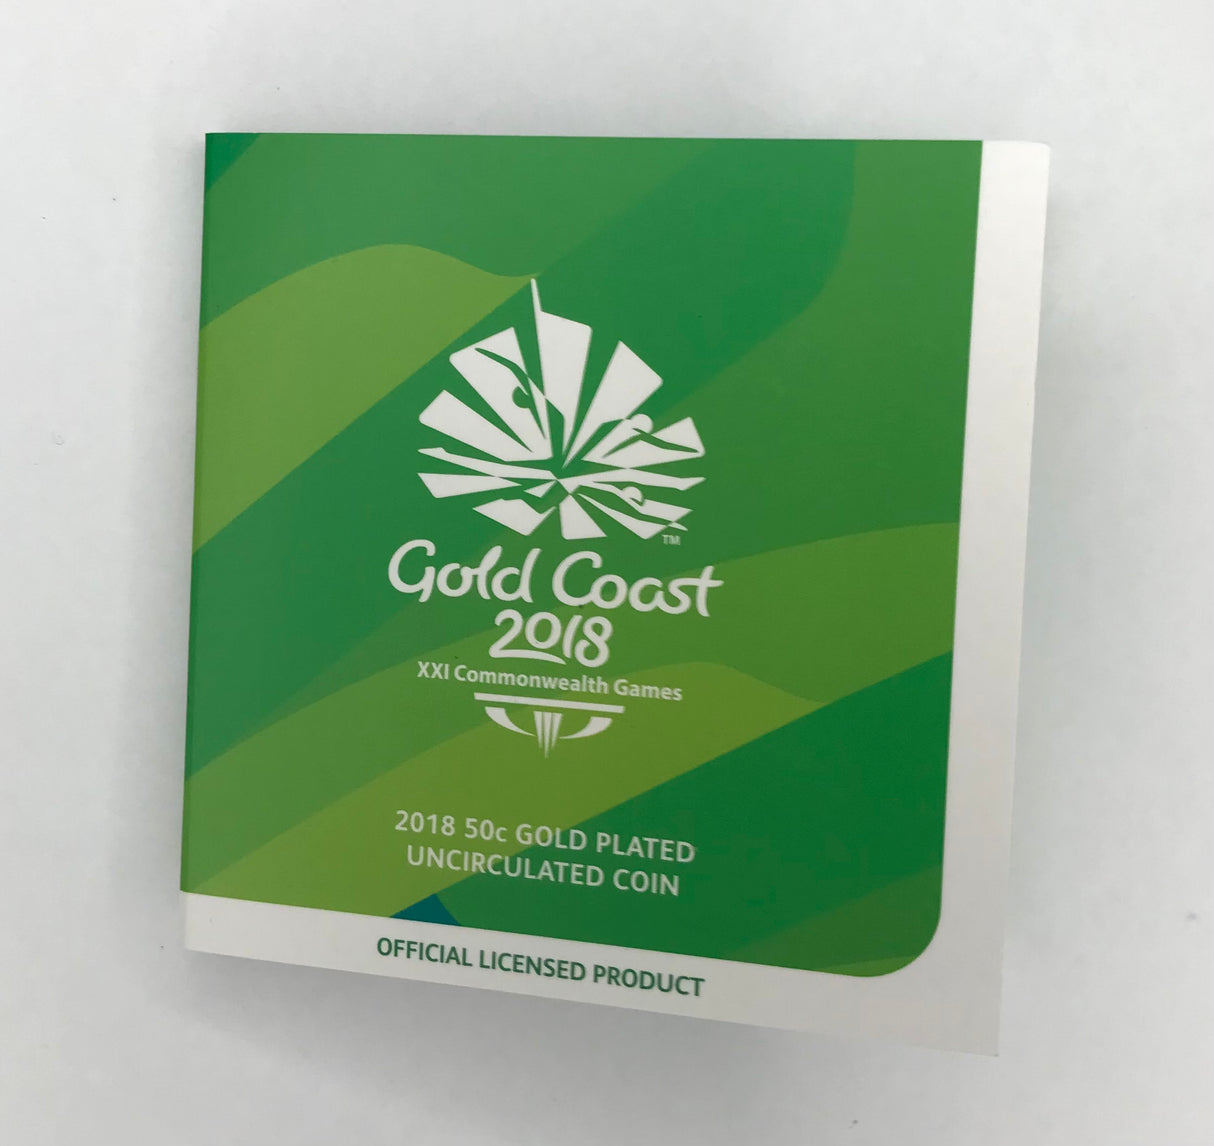 2018 50c Gold Plated Uncirculated Coin. Gold Coast Commonwealth Games